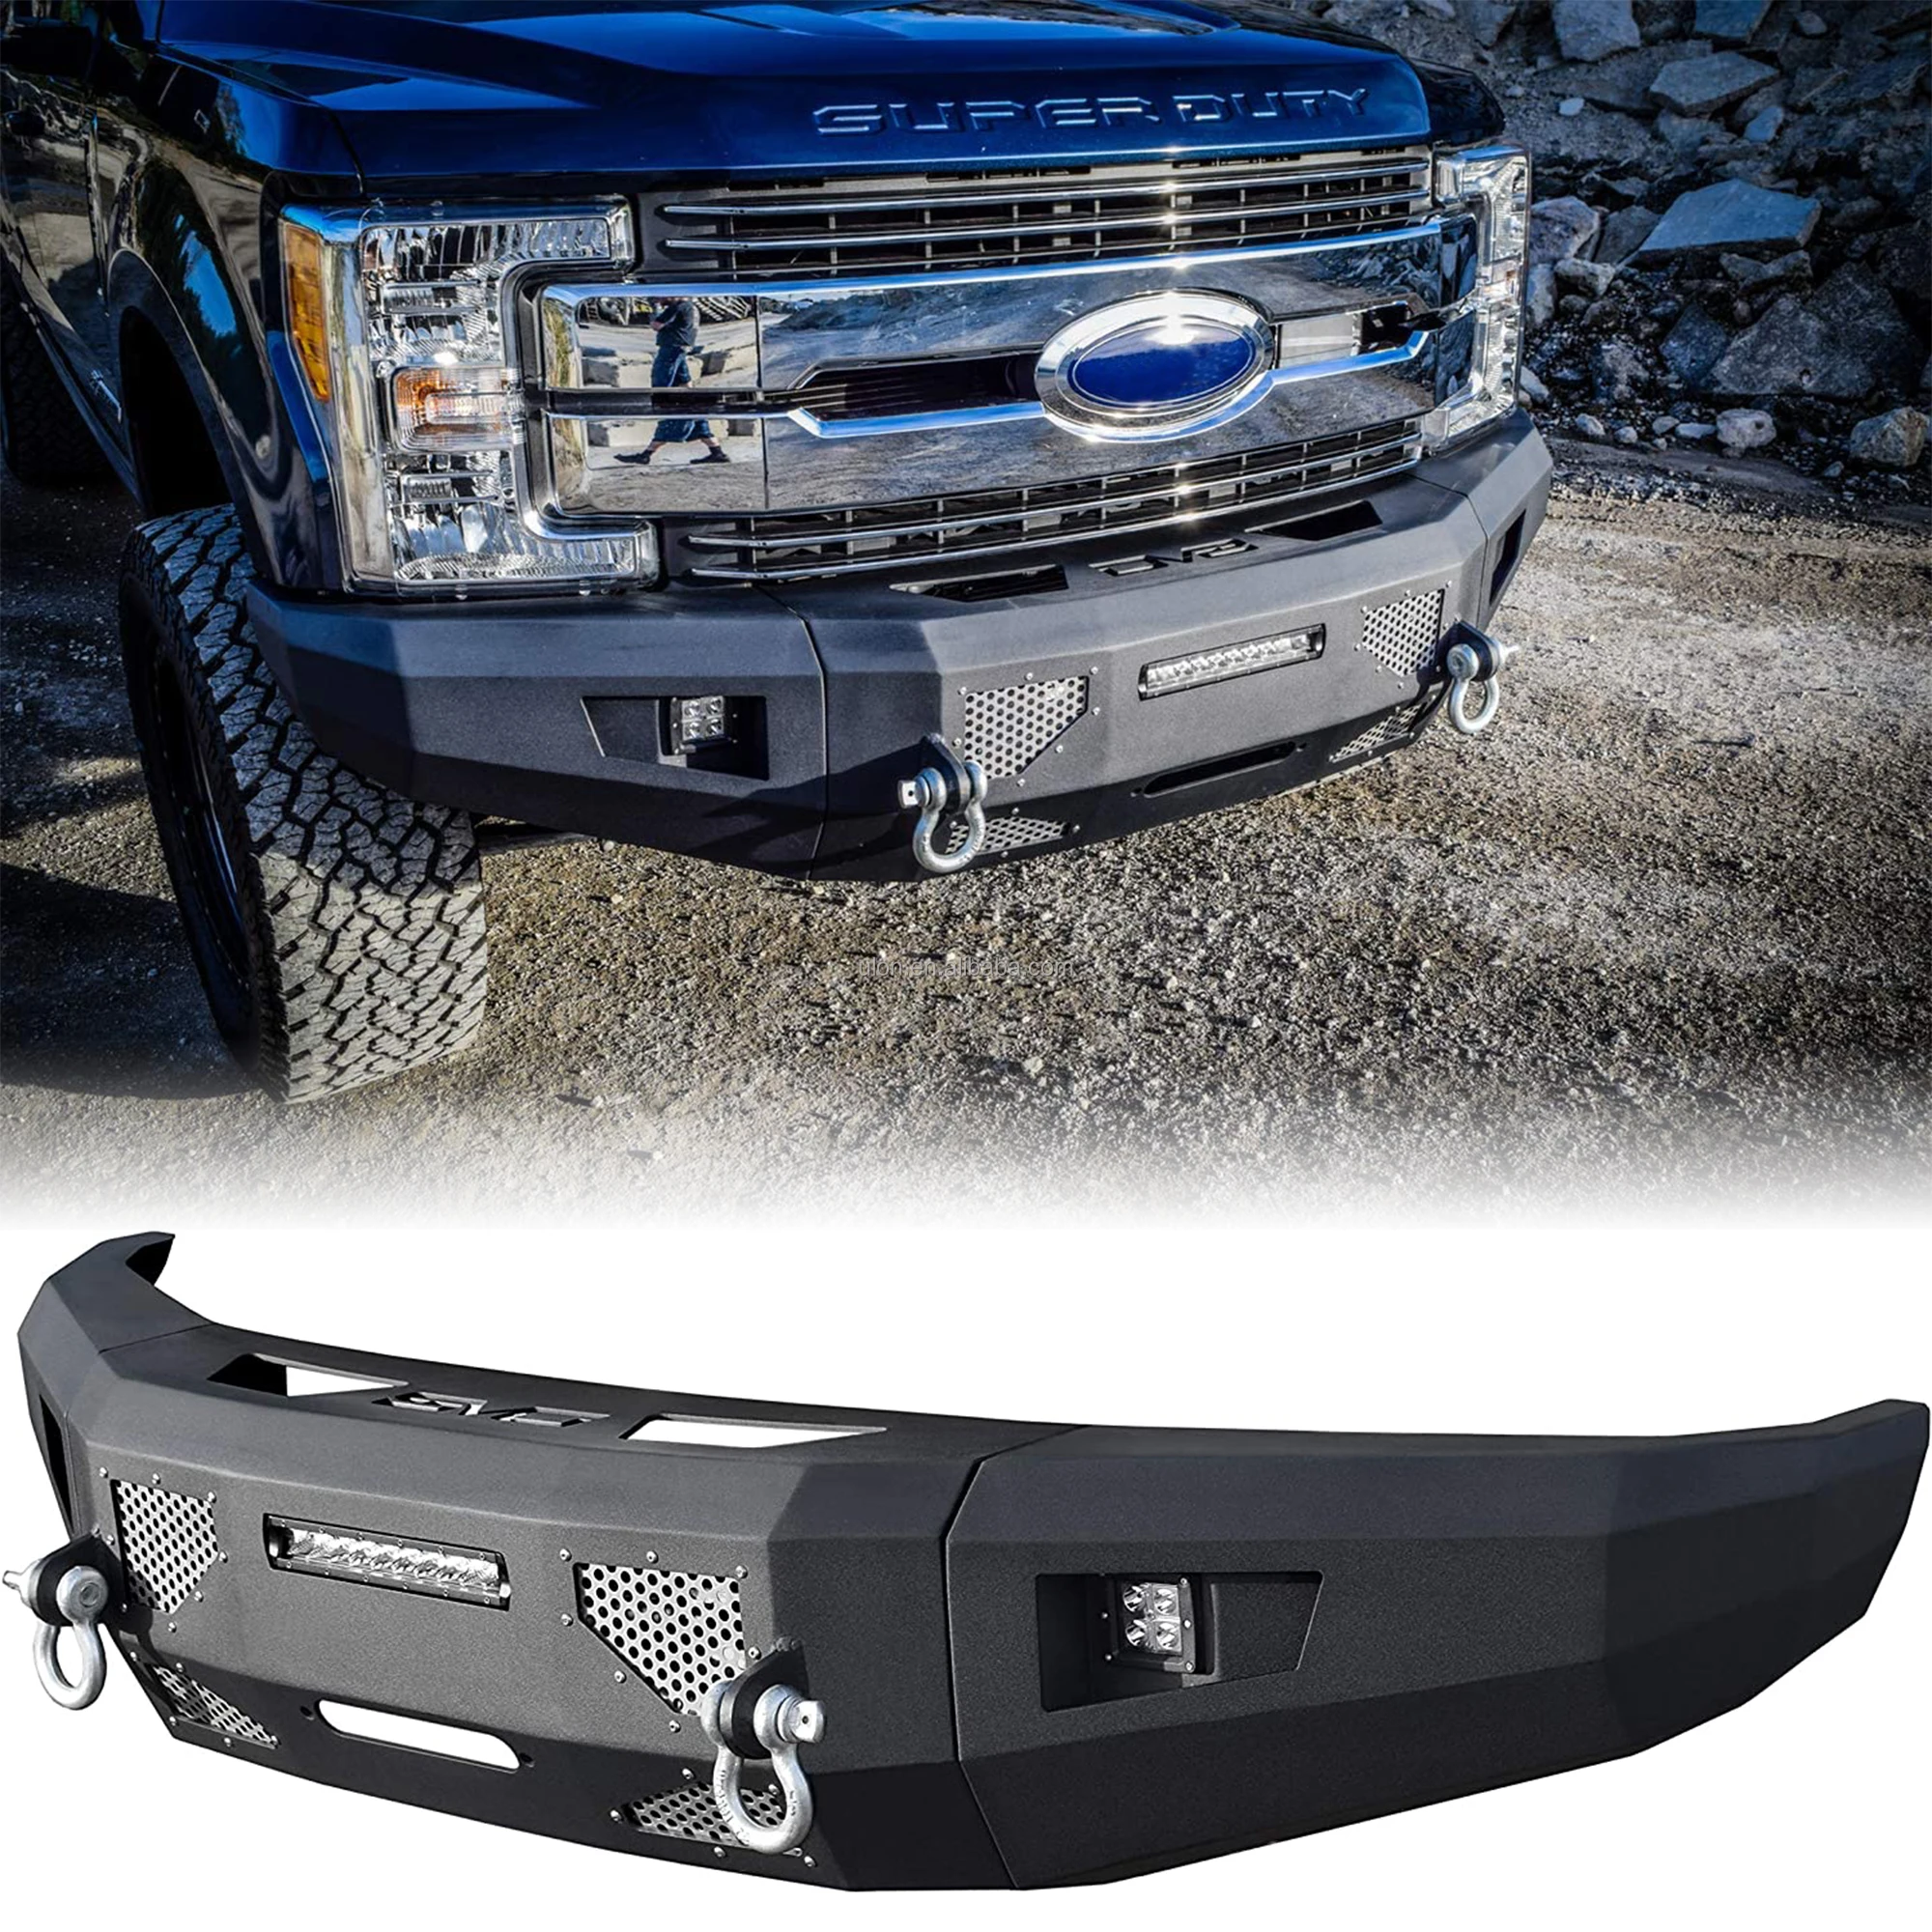 

Offroad Front Bumper fit 2017-2019 Ford F-250 F-350 F-450 Super Duty Trucks 3pc Modular Construction with Winch Mount